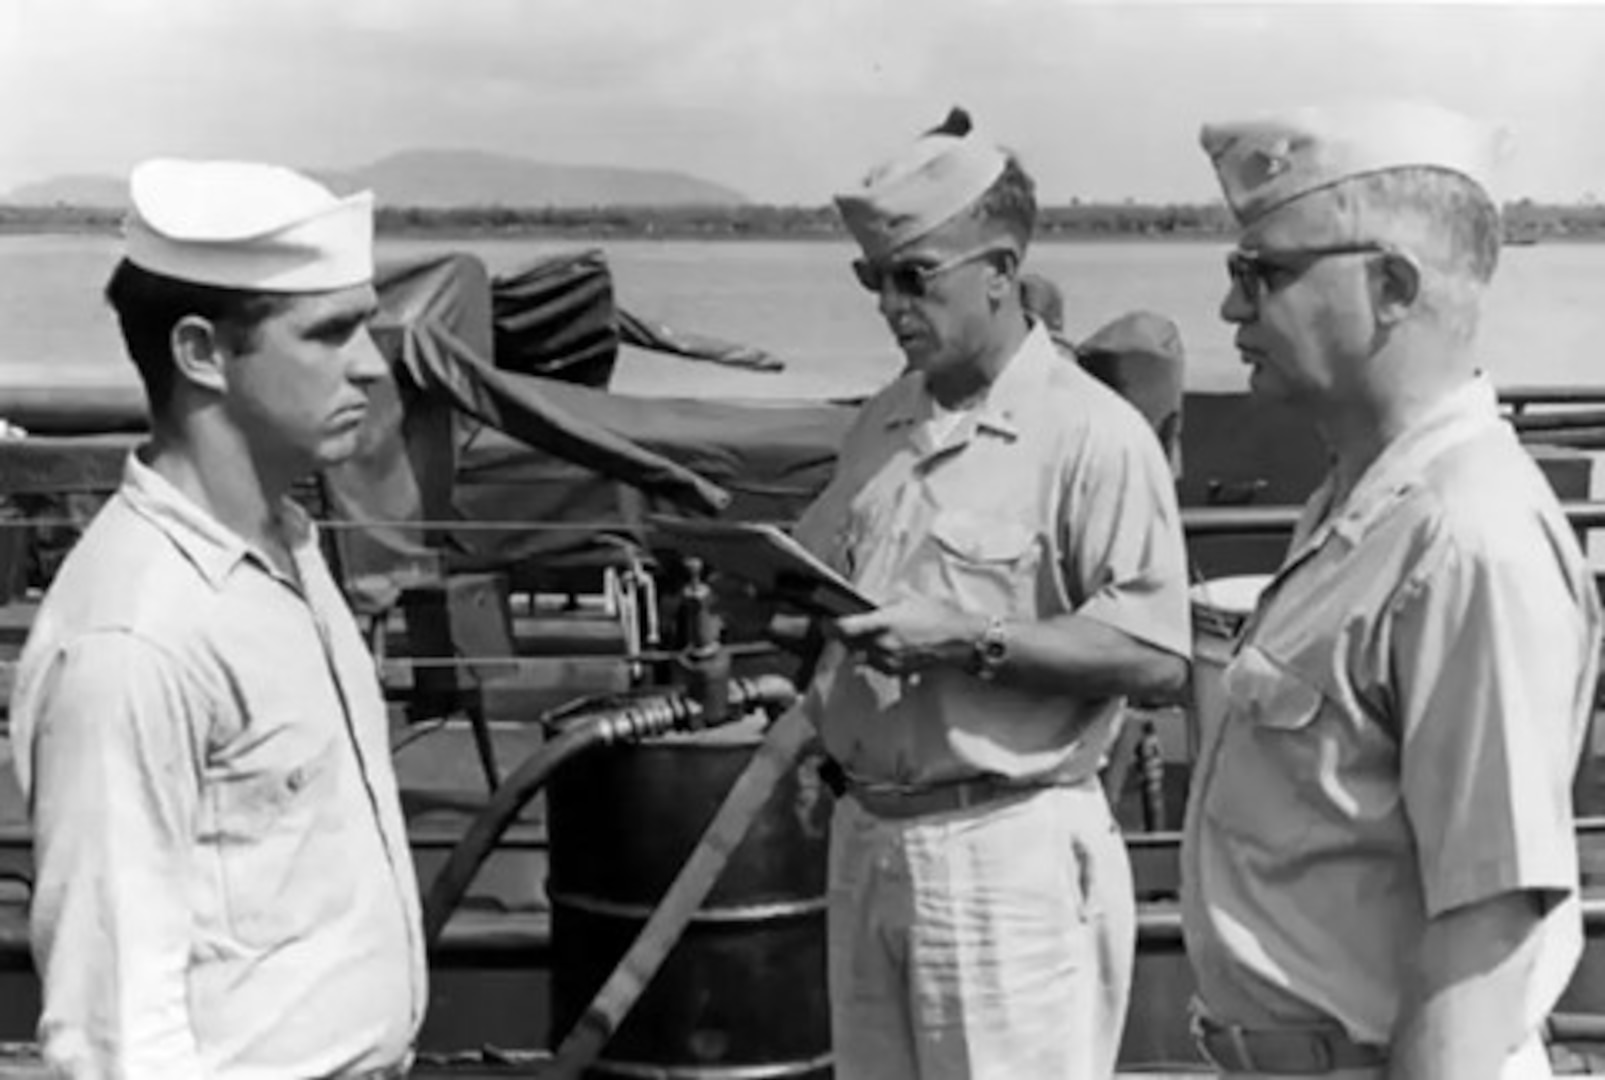 Coast Guard Gunner’s Mate Willis Goff, who volunteered for the extraction mission along with Villarreal, receives his Silver Star Medal in an official ceremony. (U.S. Coast Guard)